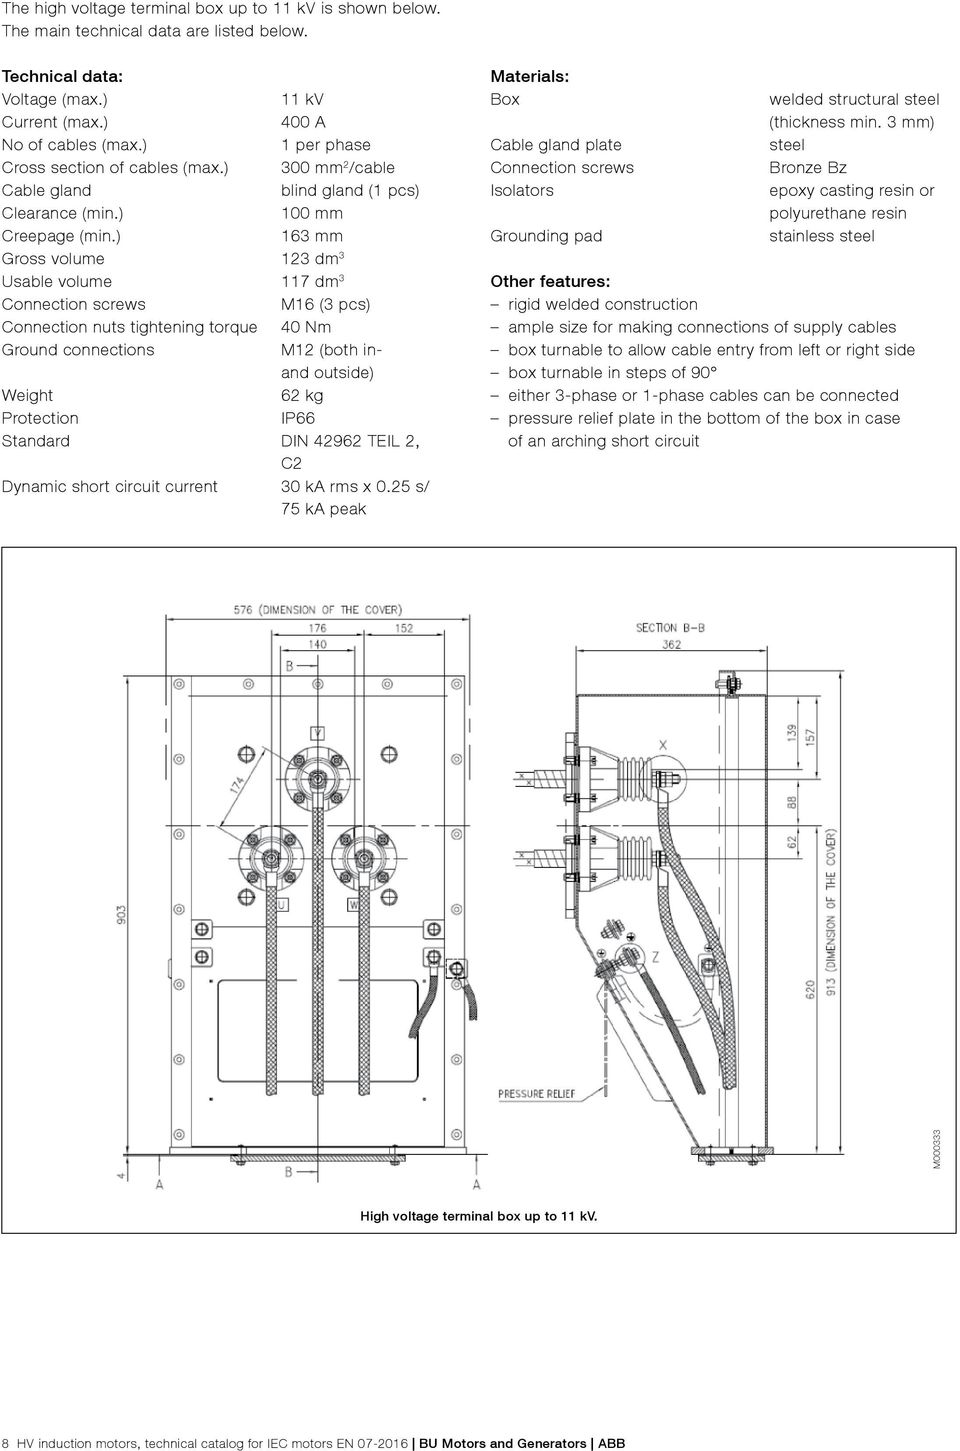 ) 163 mm Gross volume 123 dm 3 Usable volume 117 dm 3 Connection screws M16 (3 pcs) Connection nuts tightening torque 40 Nm Ground connections M12 (both inand outside) Weight 62 Protection IP66